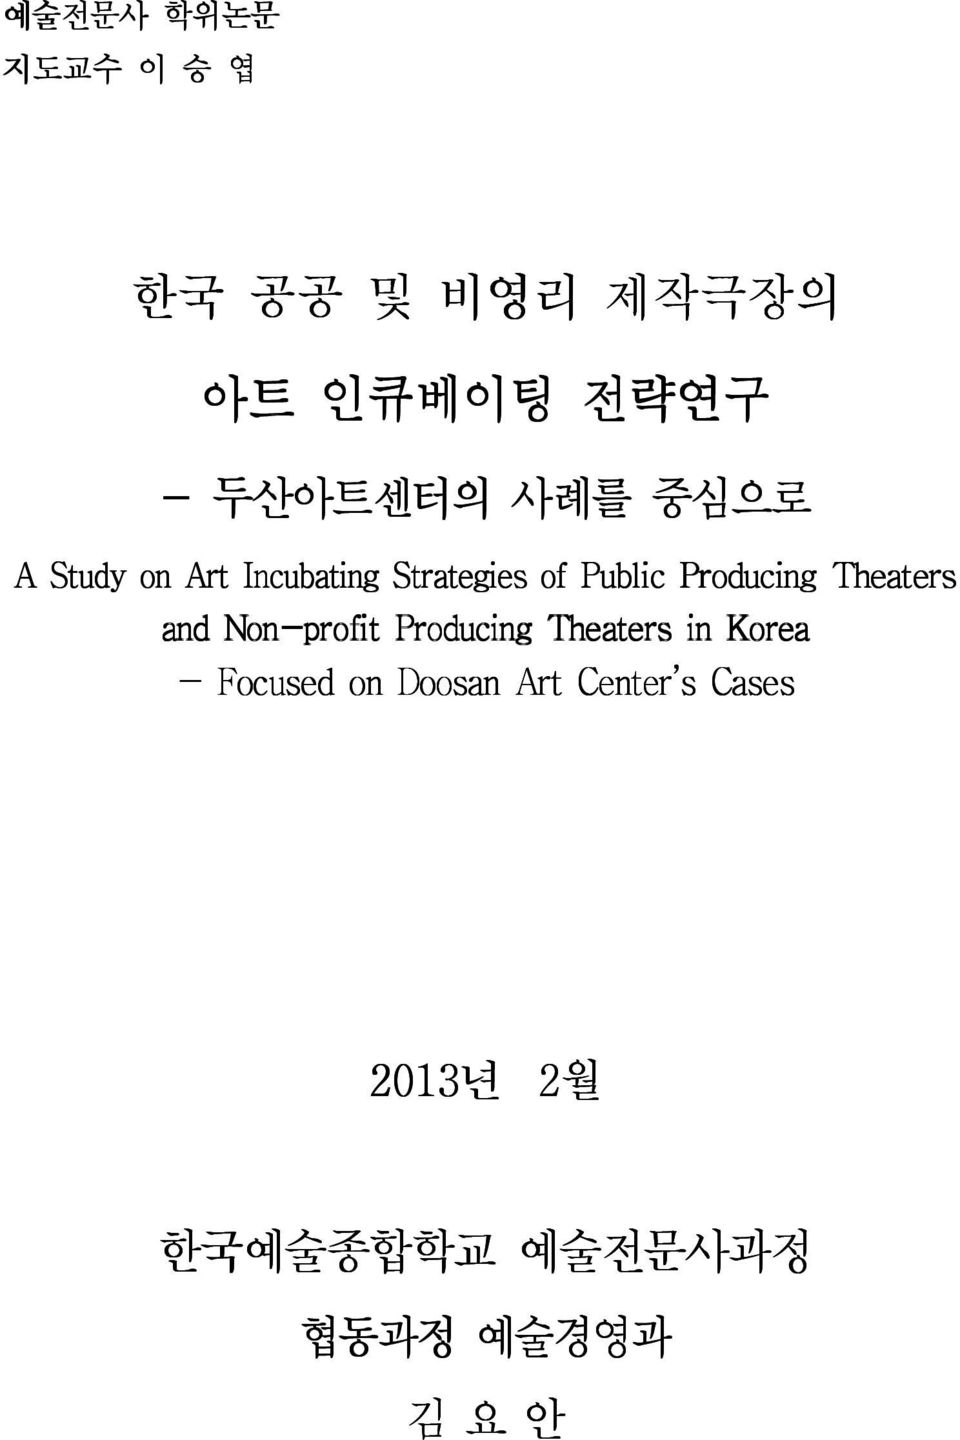 Theaters and Non-profit Producing Theaters in Korea - Focused on